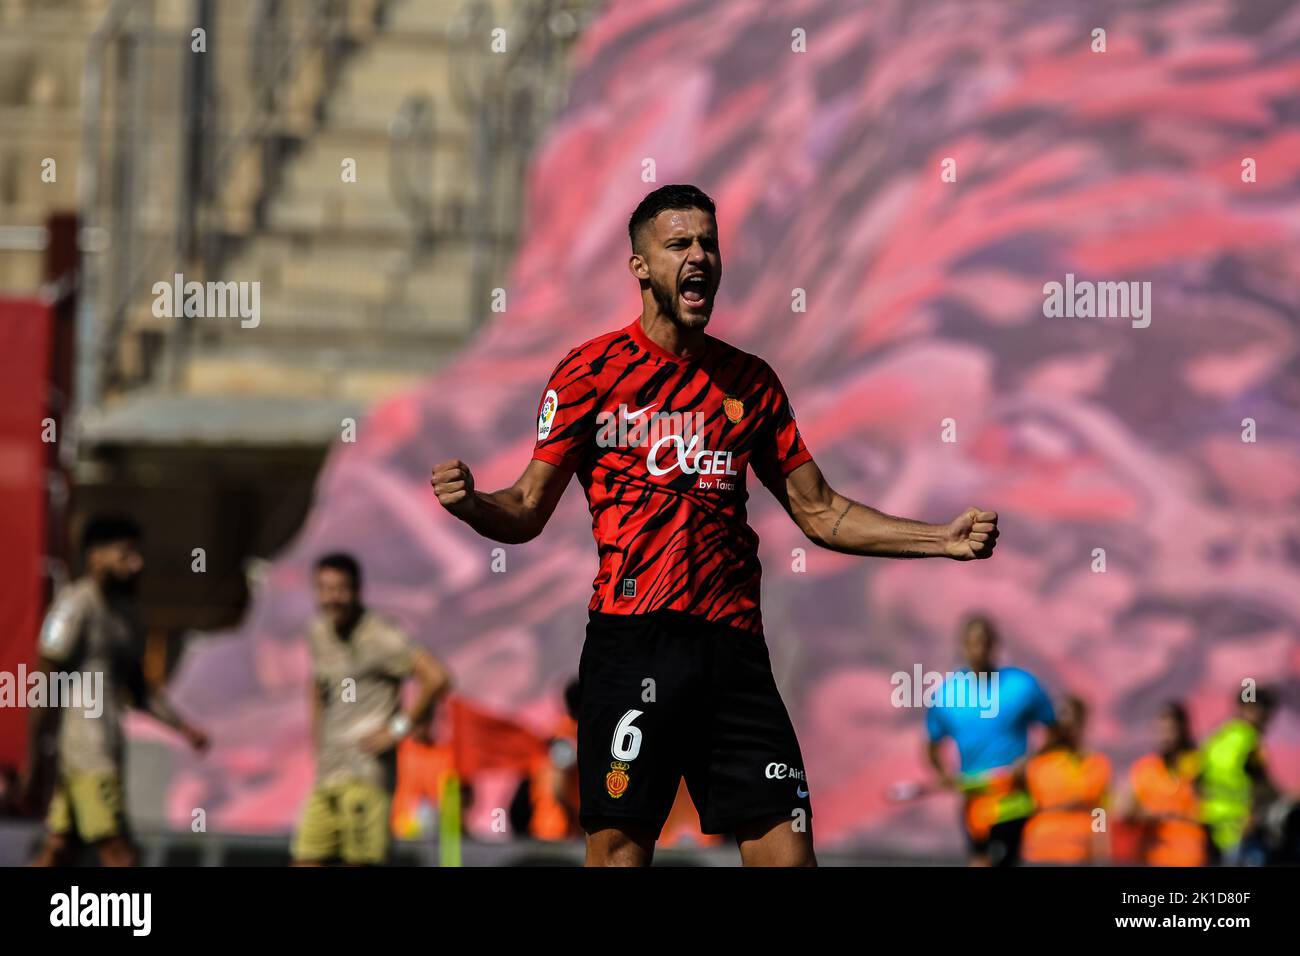 MALLORCA, SPAIN - SEPTEMBER 17: Jose Copete of RCD Mallorca celebrates the victory after the match between RCD Mallorca and Almeria CF of La Liga Santander on September 17, 2022 at Visit Mallorca Stadium Son Moix in Mallorca, Spain. (Photo by Samuel Carreño/PxImages) Stock Photo